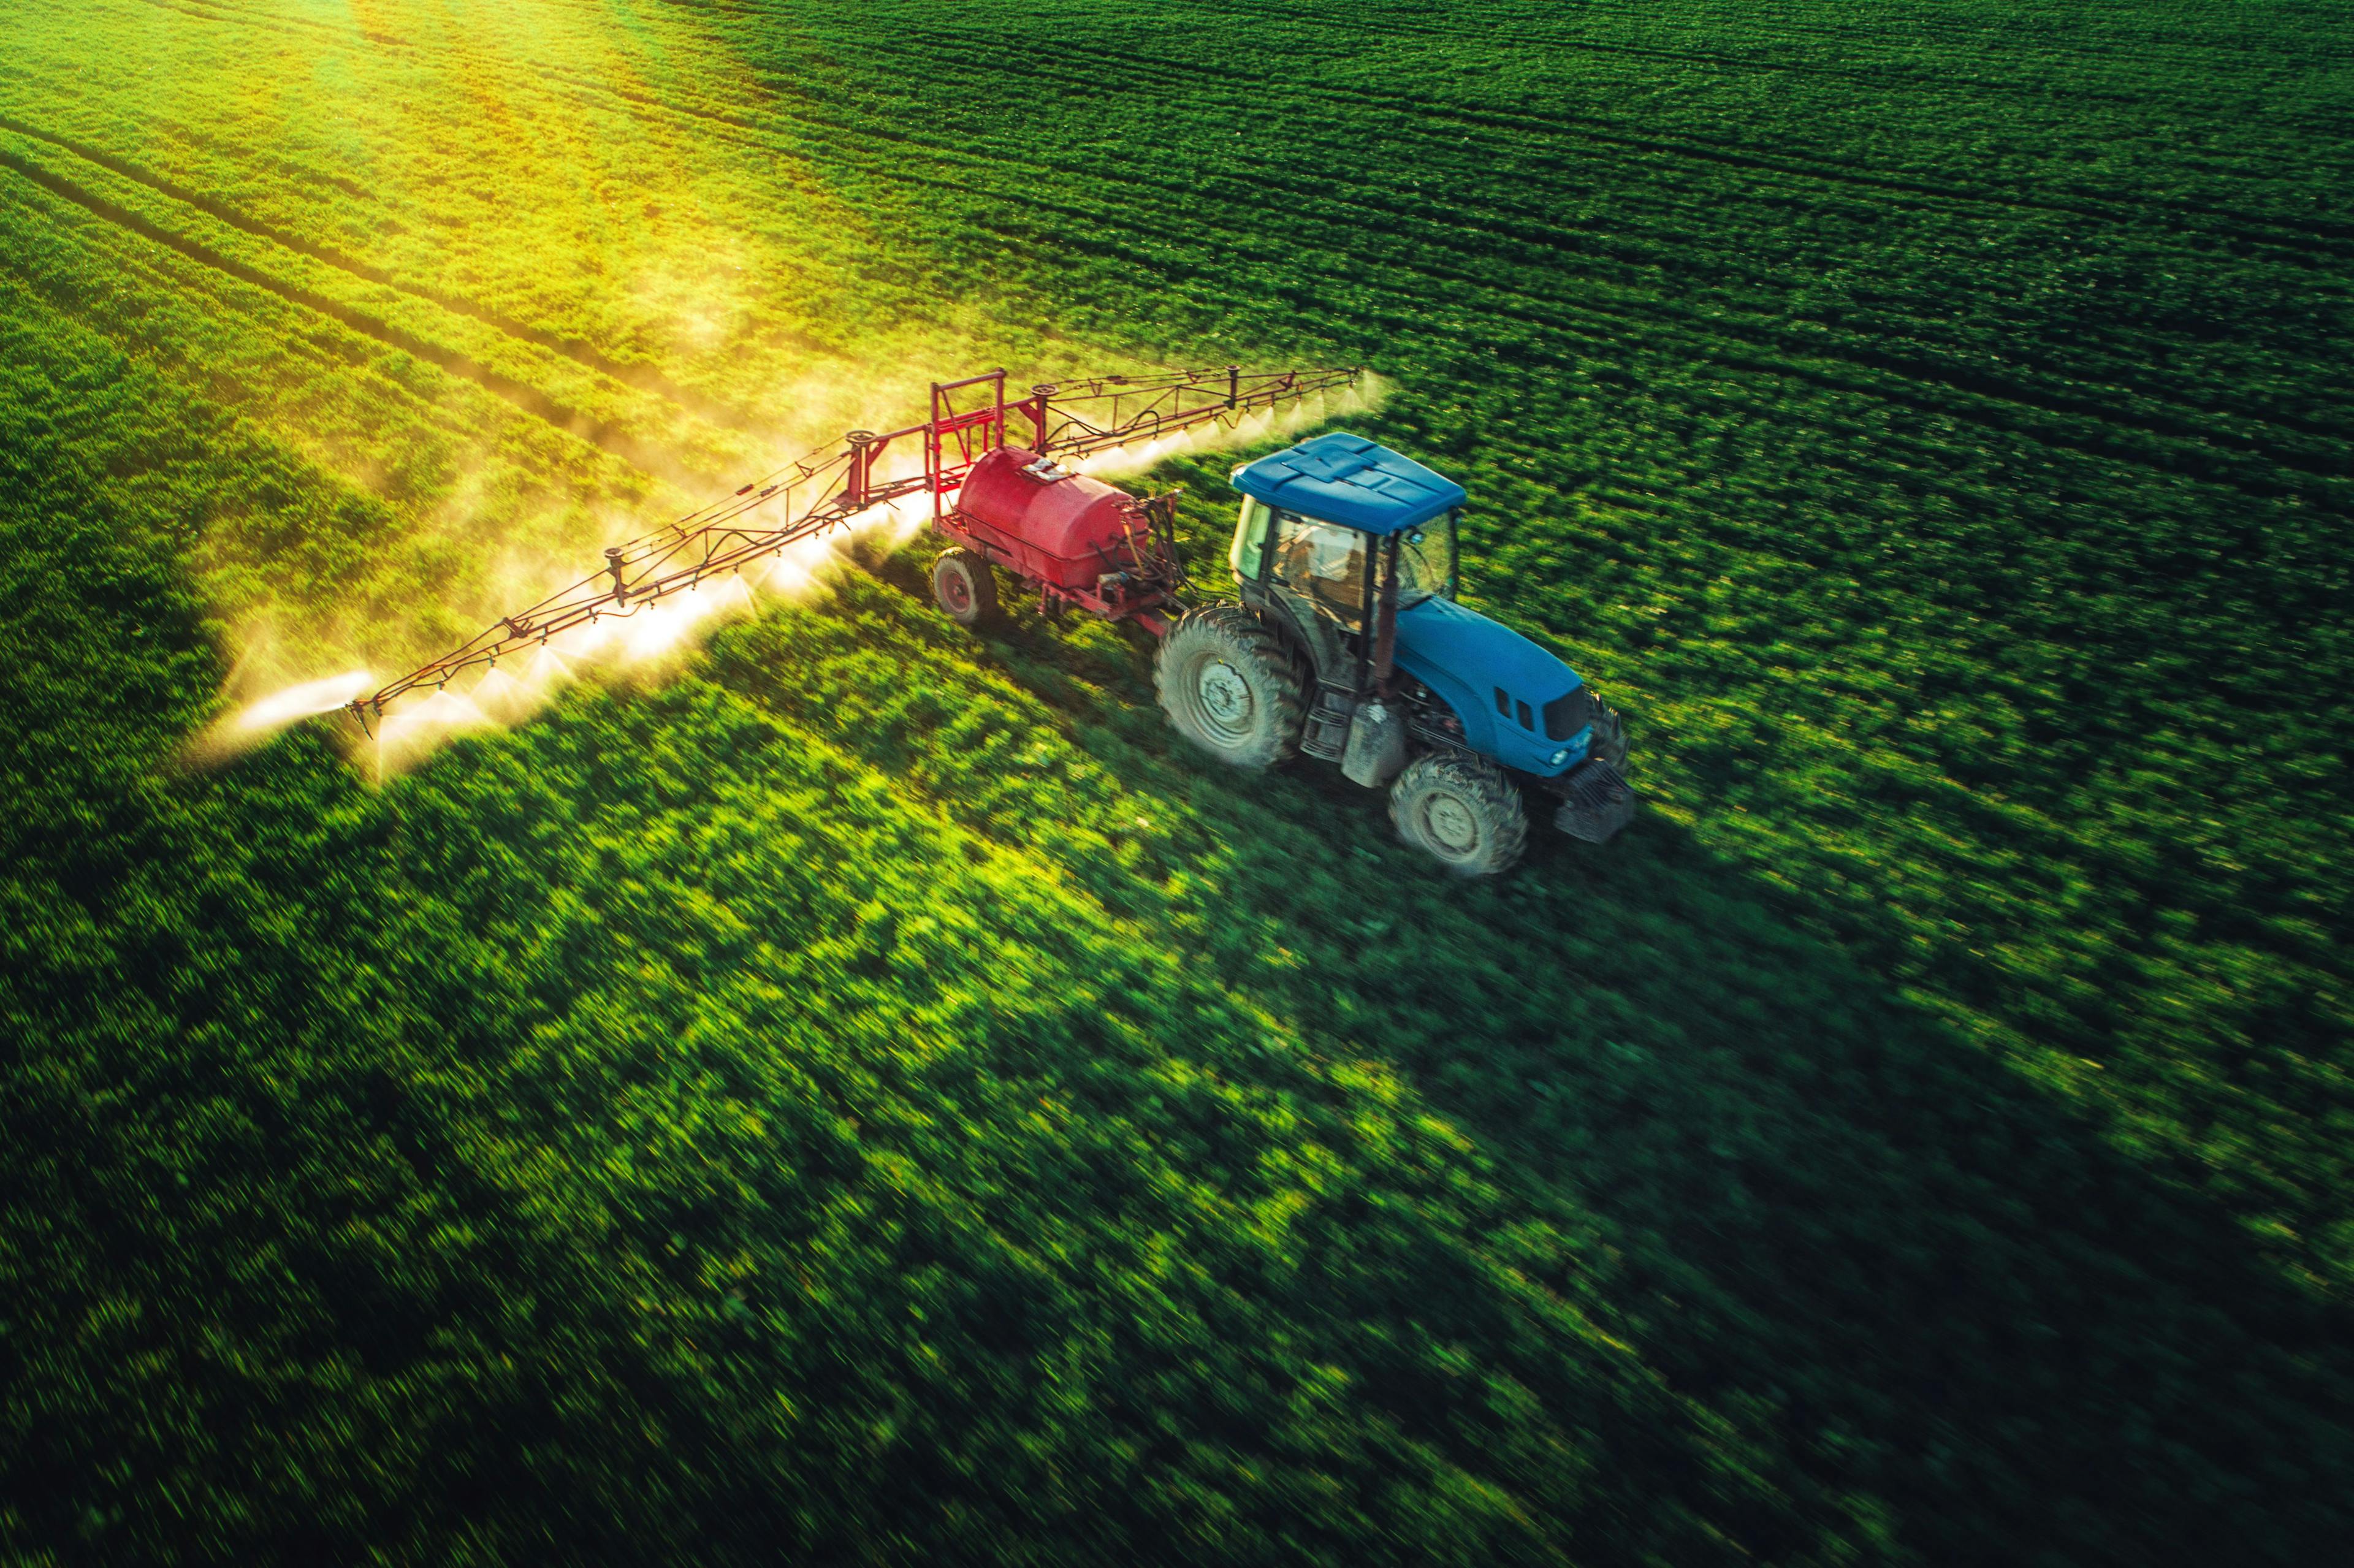 Aerial view of farming tractor plowing and spraying on field | Image Credit: © ValentinValkov - stock.adobe.com.